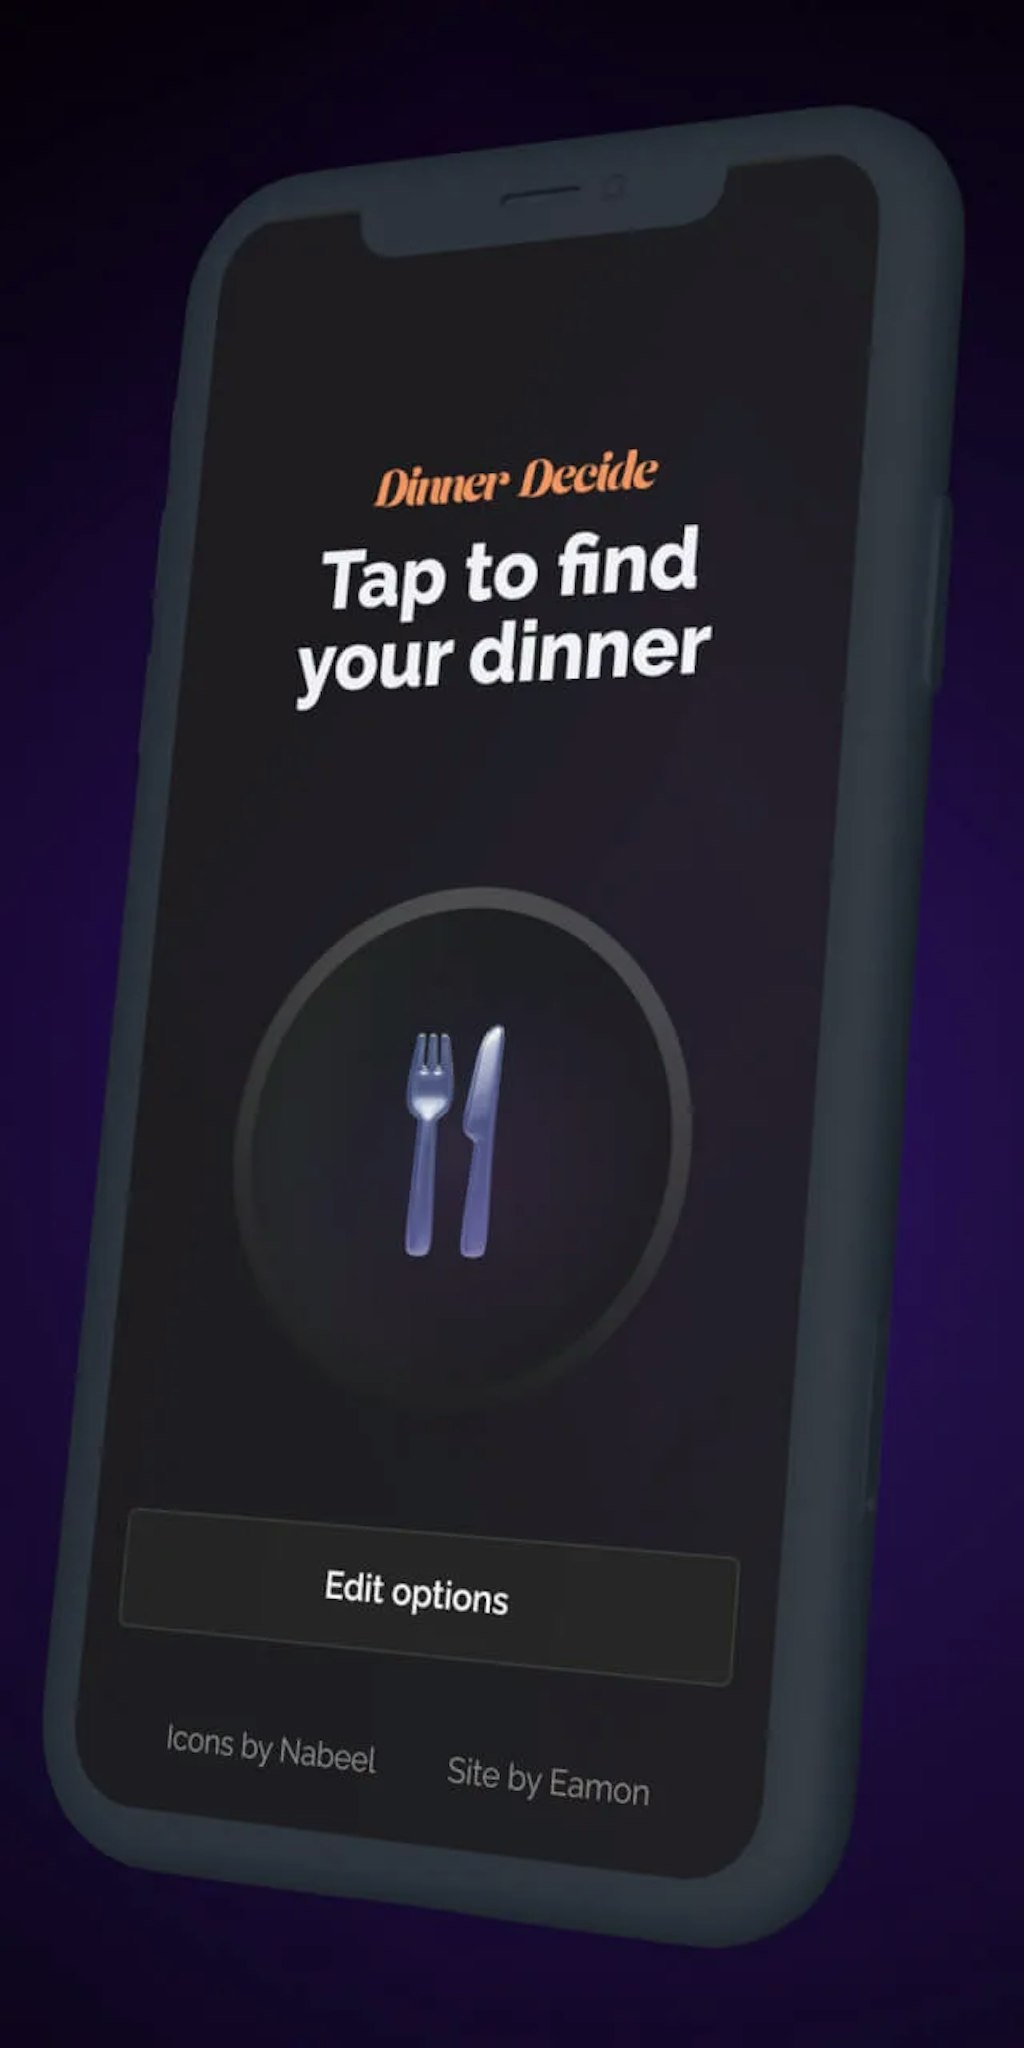 A mockup of a mobile device with the dinner decide app in it.